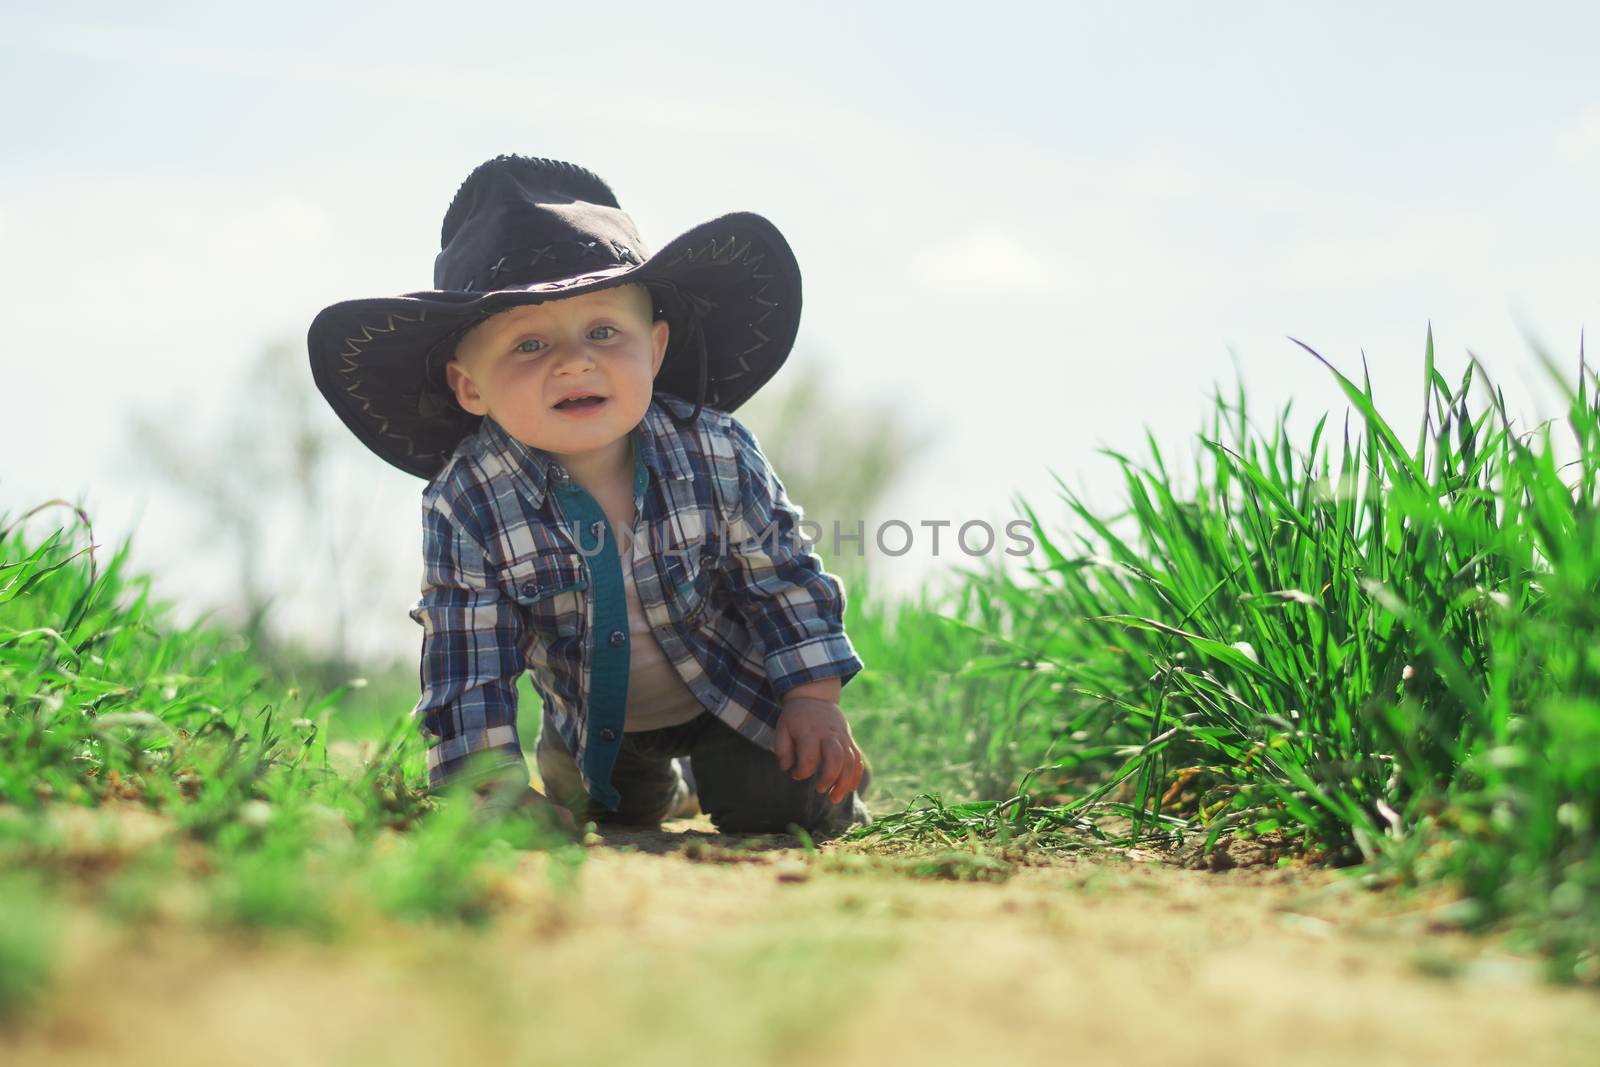 A little Caucasian baby boy with blue eyes in a cowboy hat and plaid shirt climbs in the furrow of a field with young growing grain.